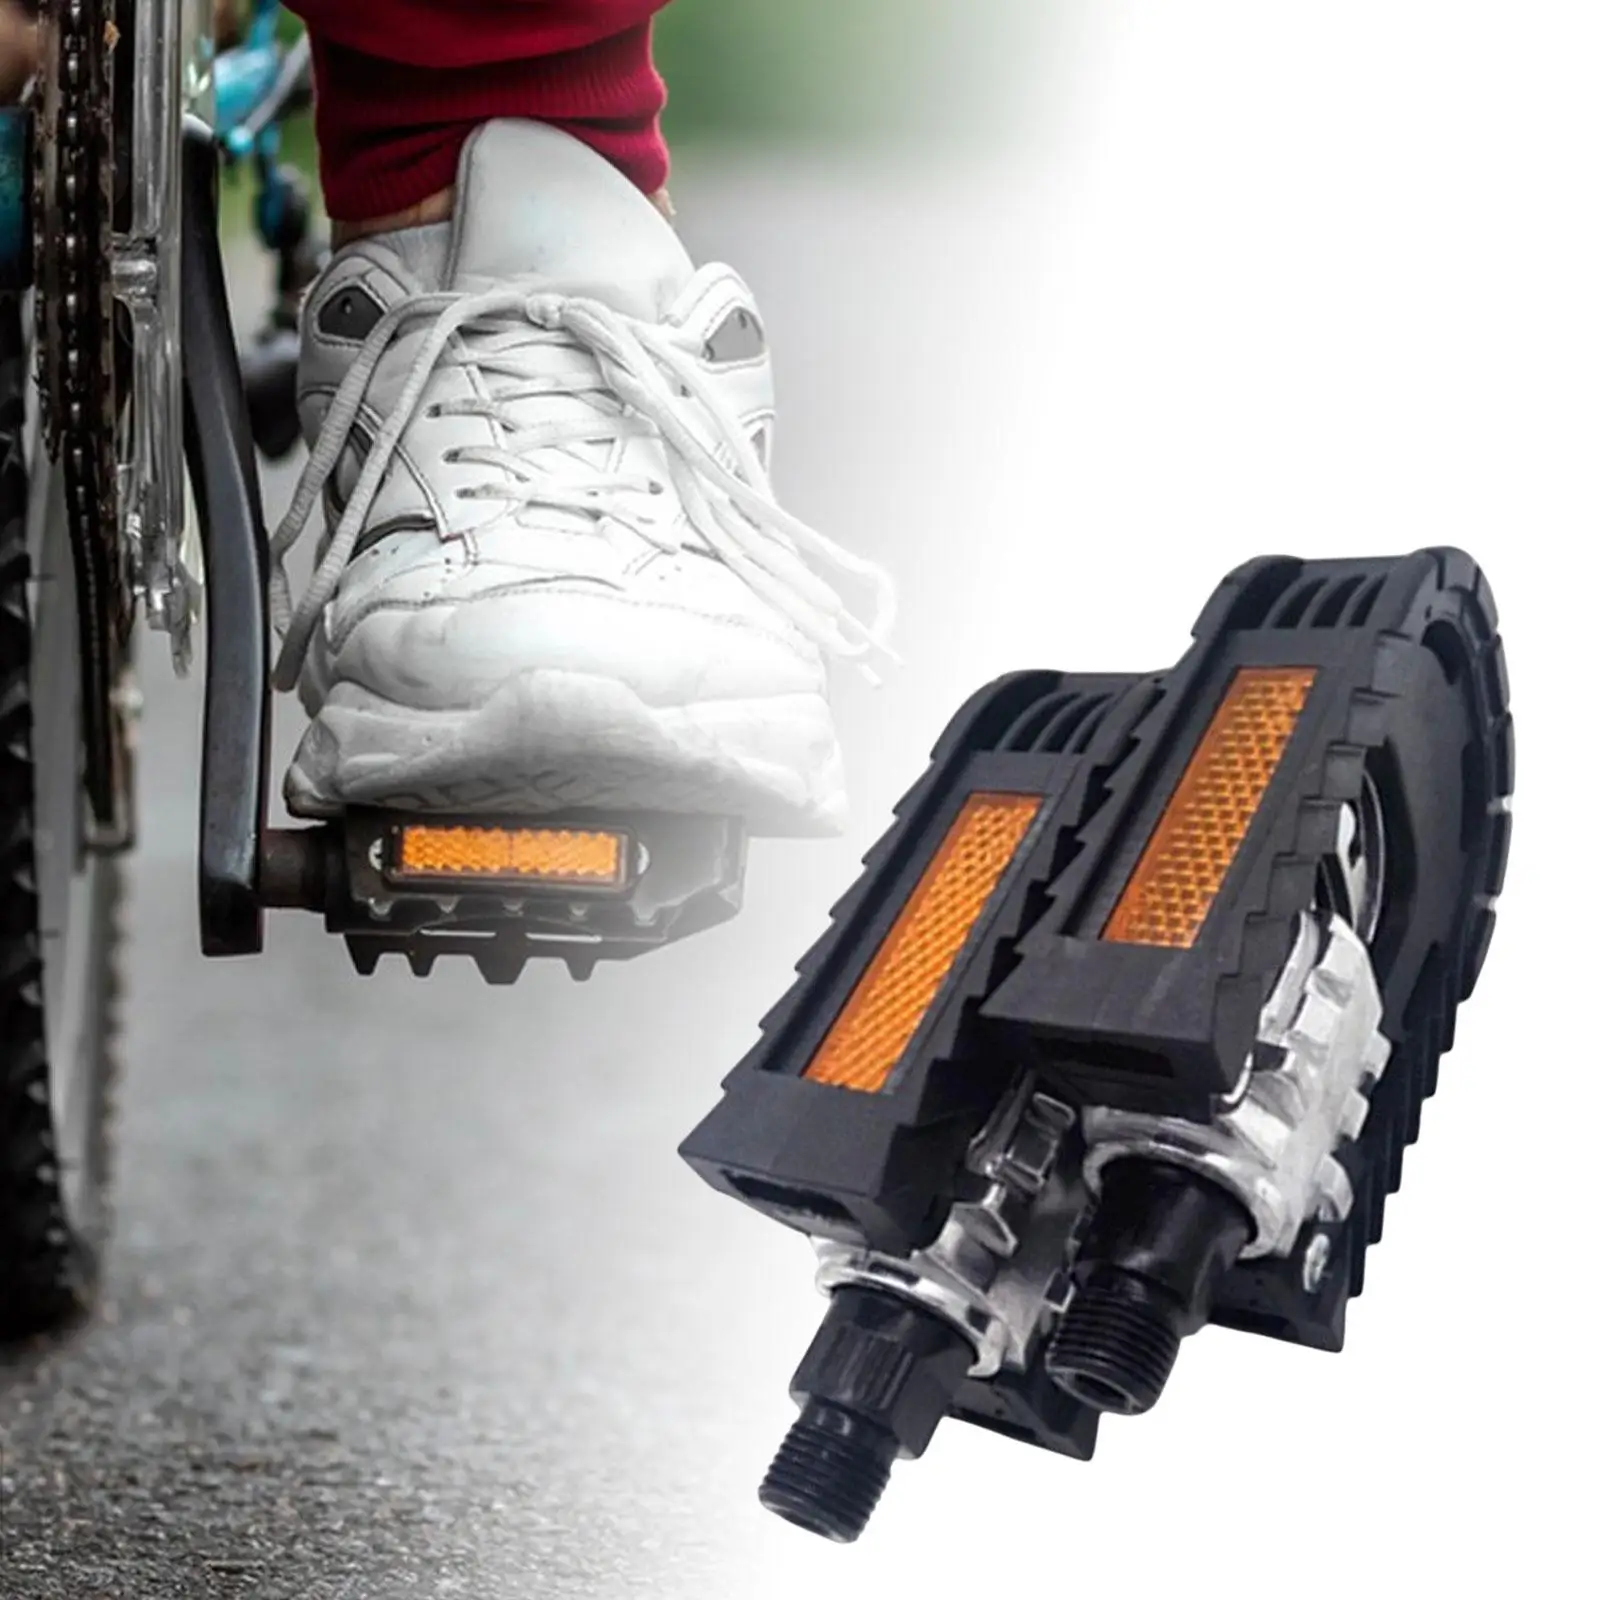 Foldable Bike Pedals Metal Universal Lightweight Bicycle Folded Platform Pedals Folding Pedals for Cycling Parts Commuting